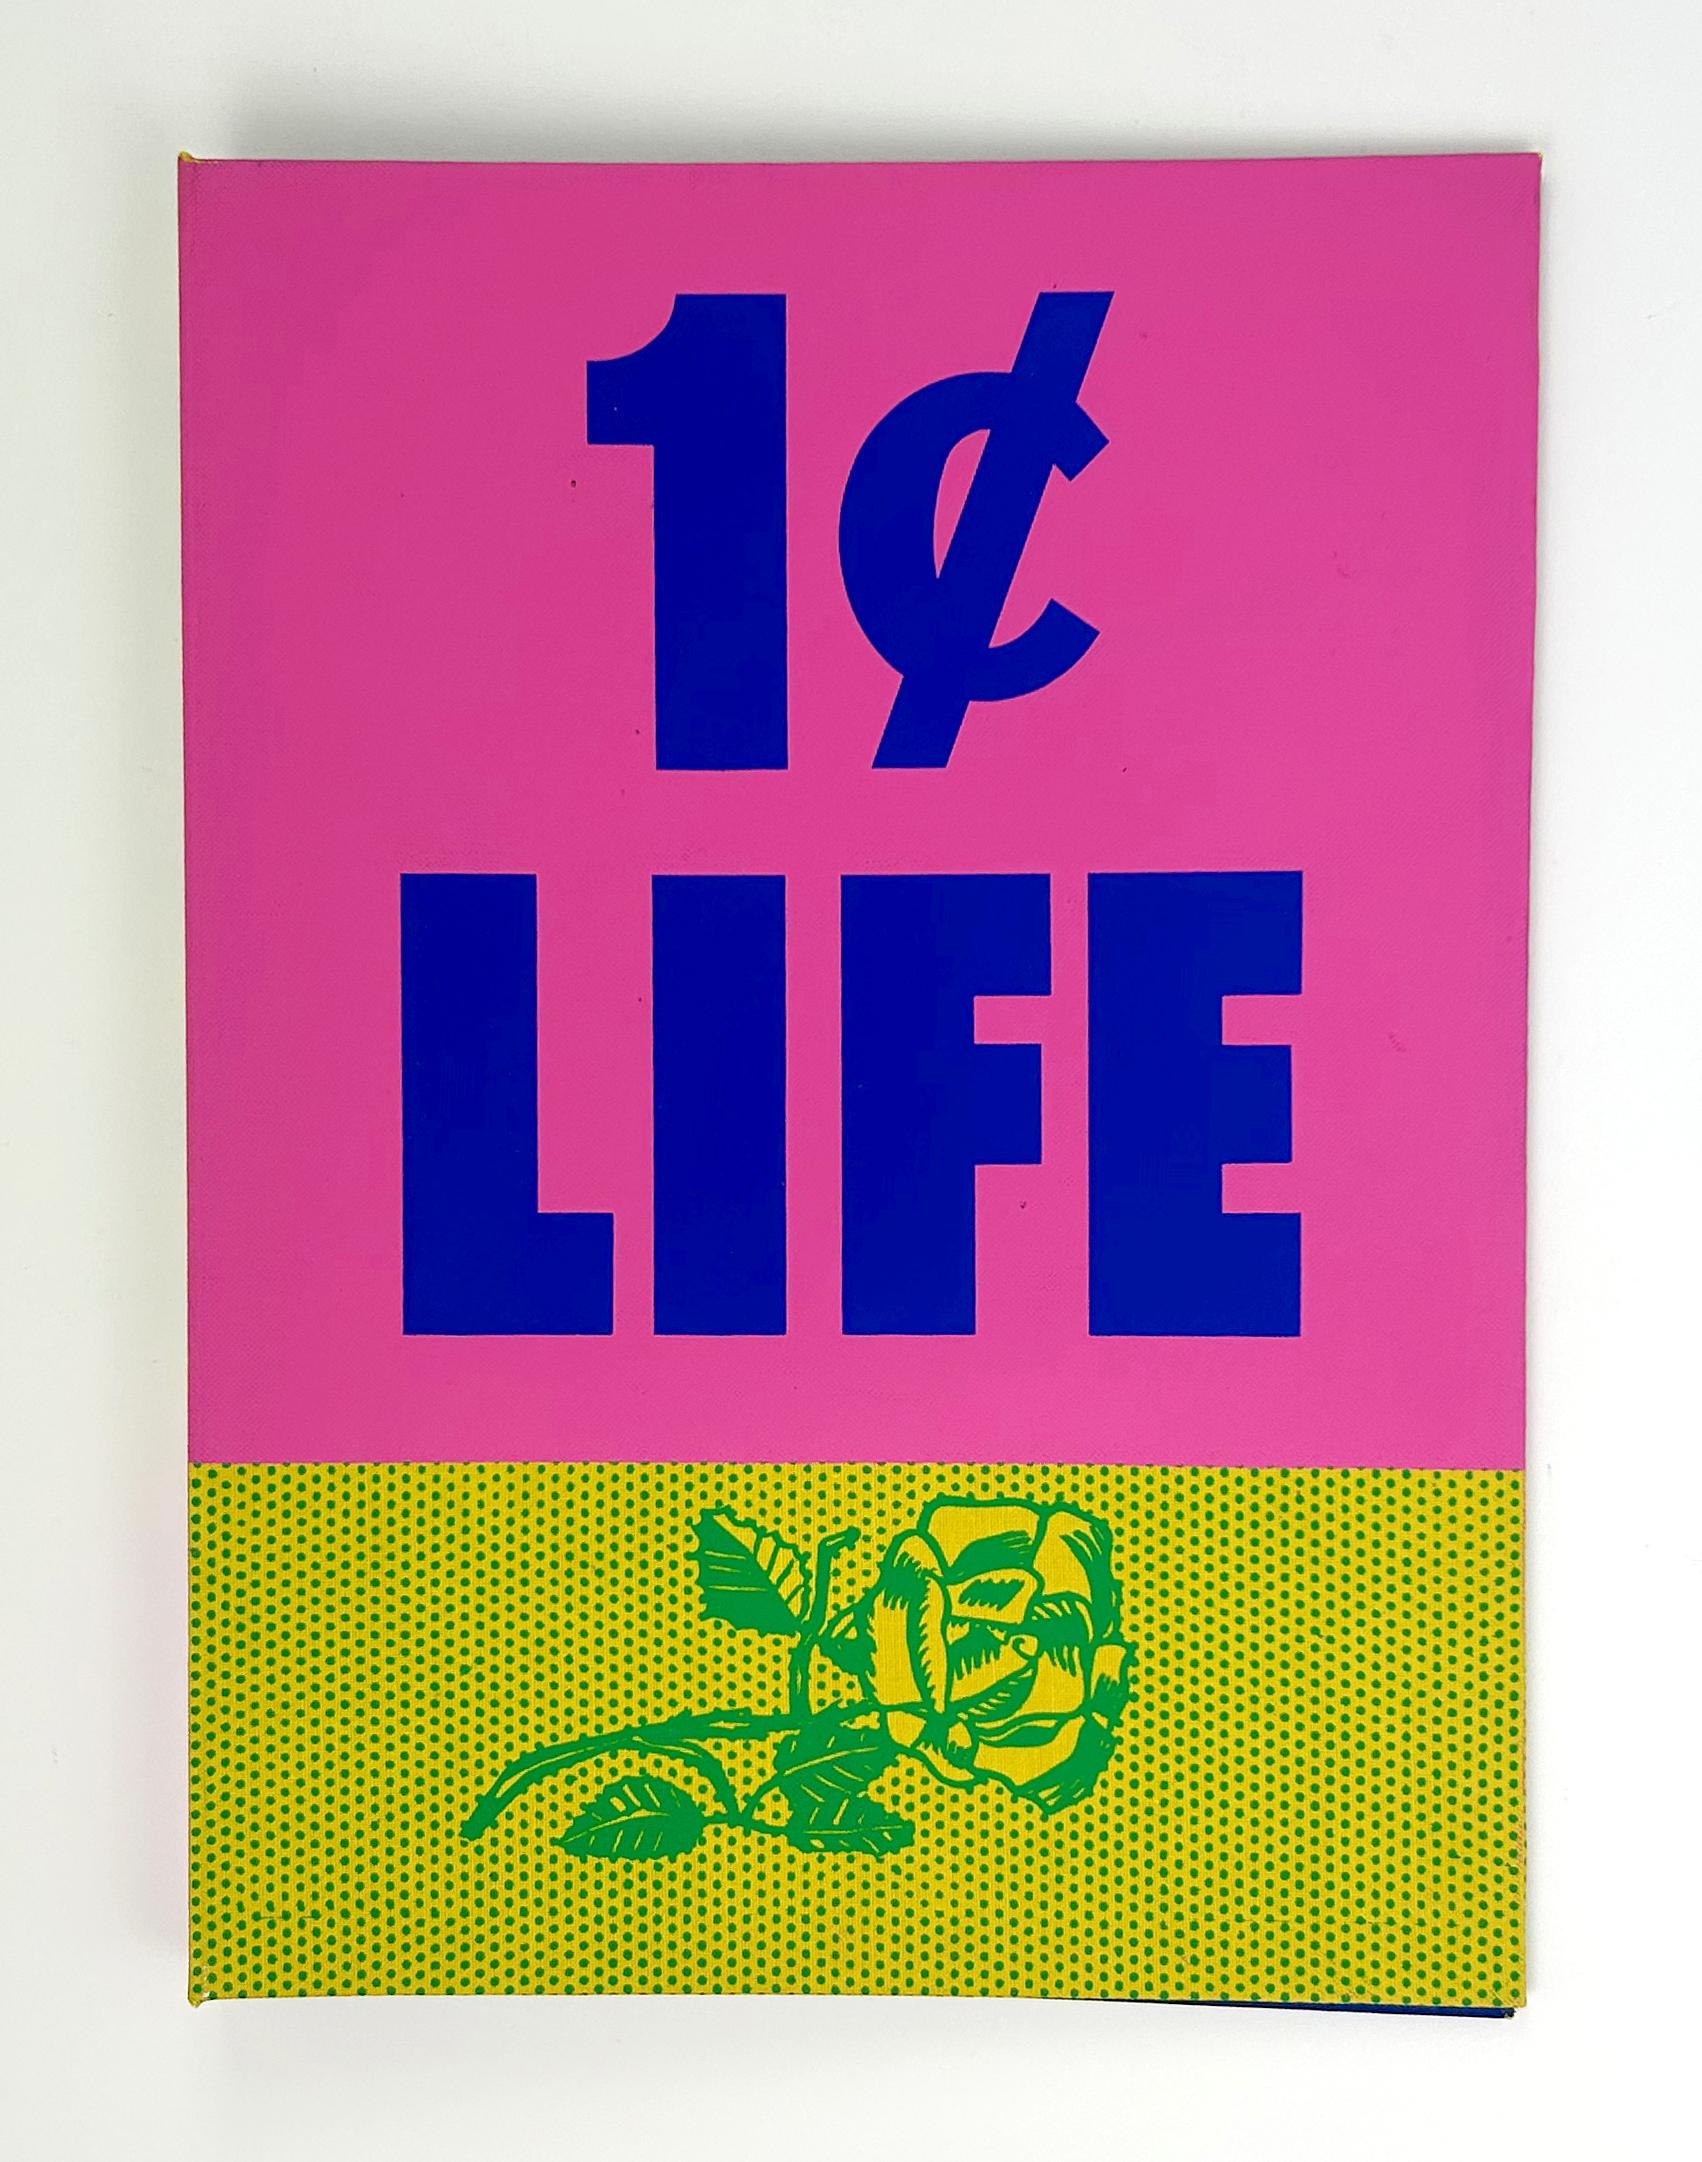 Artist: Roy Lichtenstein
Title: Rose, Cover from 1 Cent Life
(Rose) Screenprint in green over yellow linen and (1 Cent Life) Screenprint in pink over blue lettering on board of unbound book
Year: 1964
Medium: Silkscreen on linen on heavy board
Size